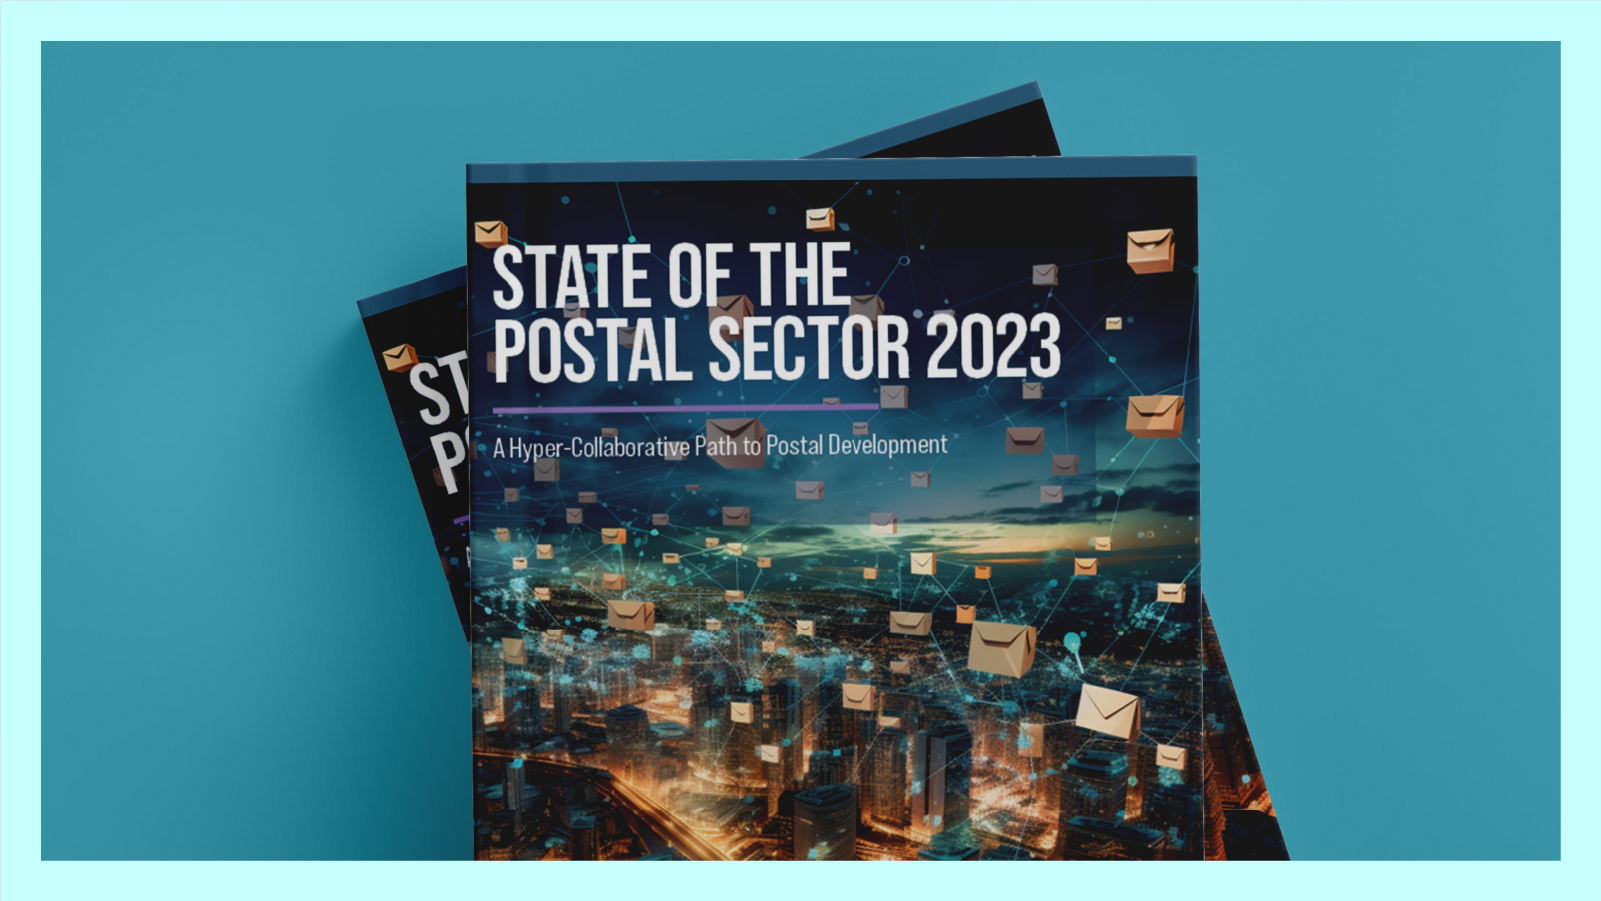 State of the Postal Sector 2023